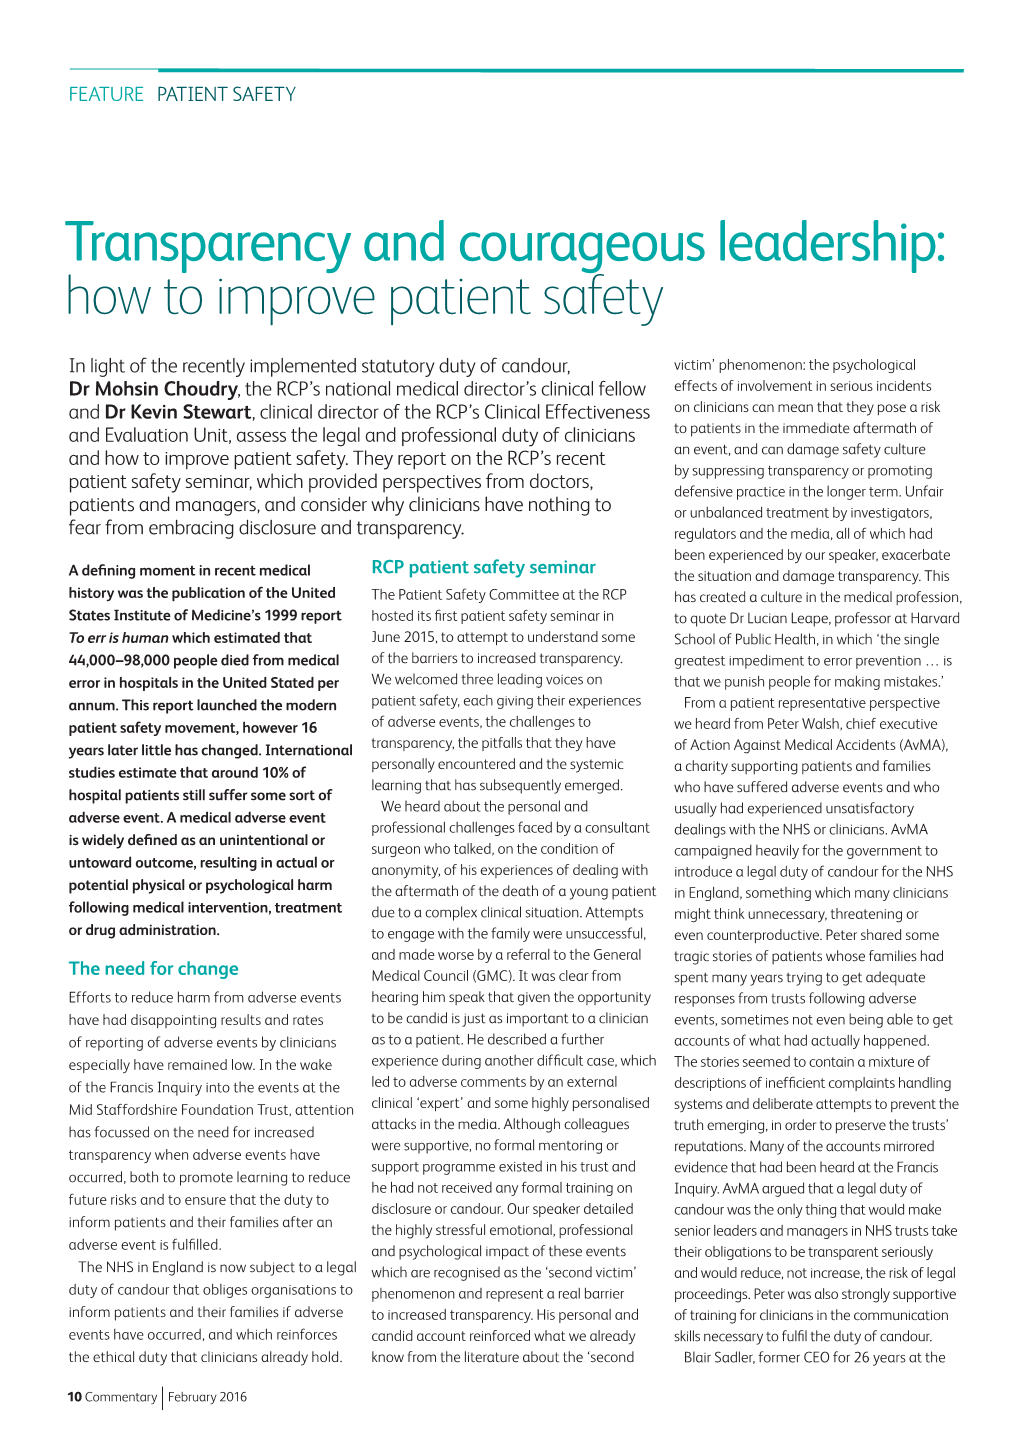 Transparency and Courageous Leadership: How to Improve Patient Safety